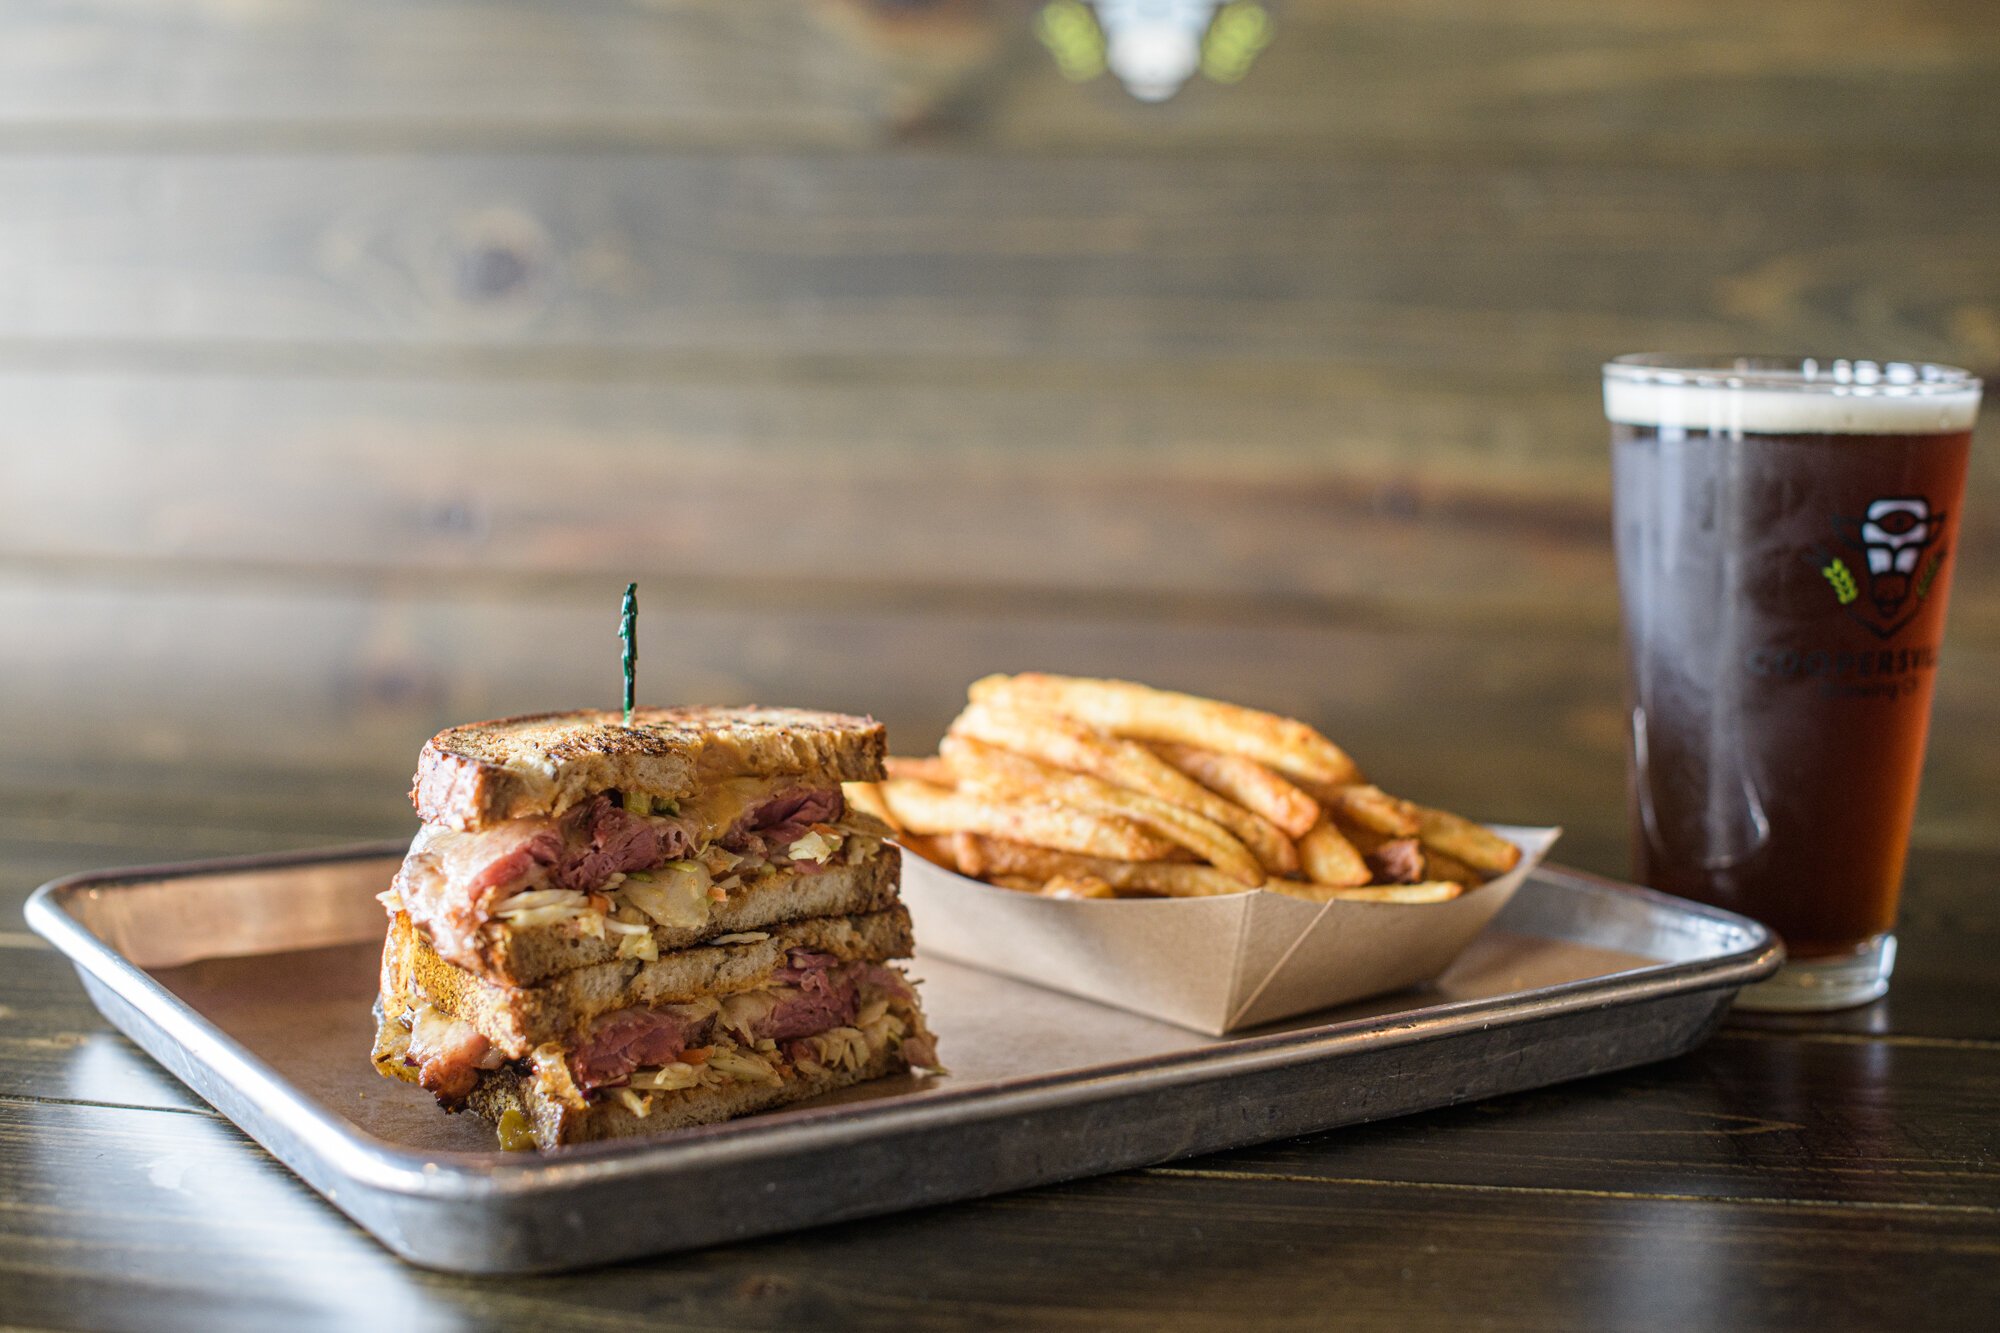 One Eyed Pete's features BBQ and sandwiches, and specials like Pete's Smoked Reuben Sandwich.